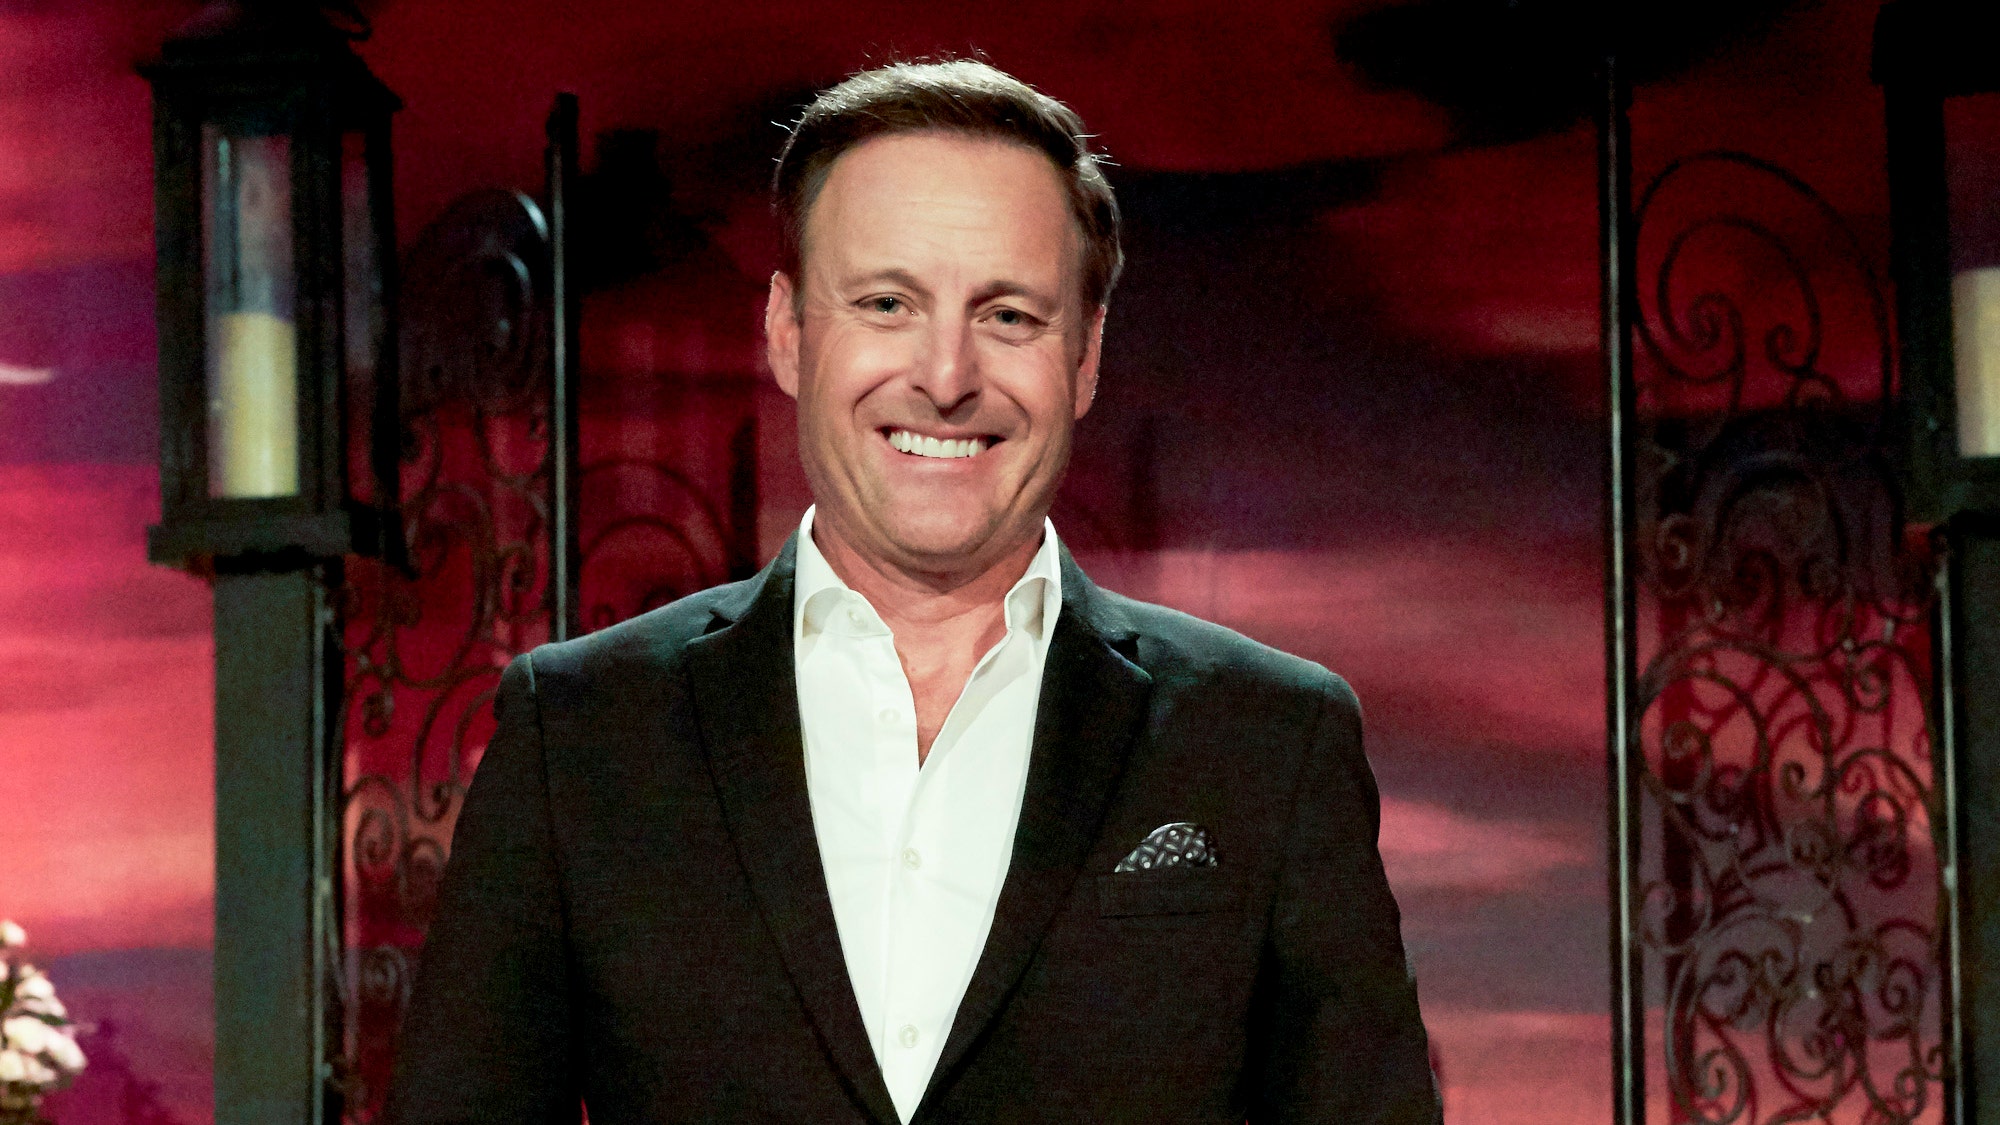 Chris Harrison not returning to 'Bachelor in Paradise' following scandal: reports